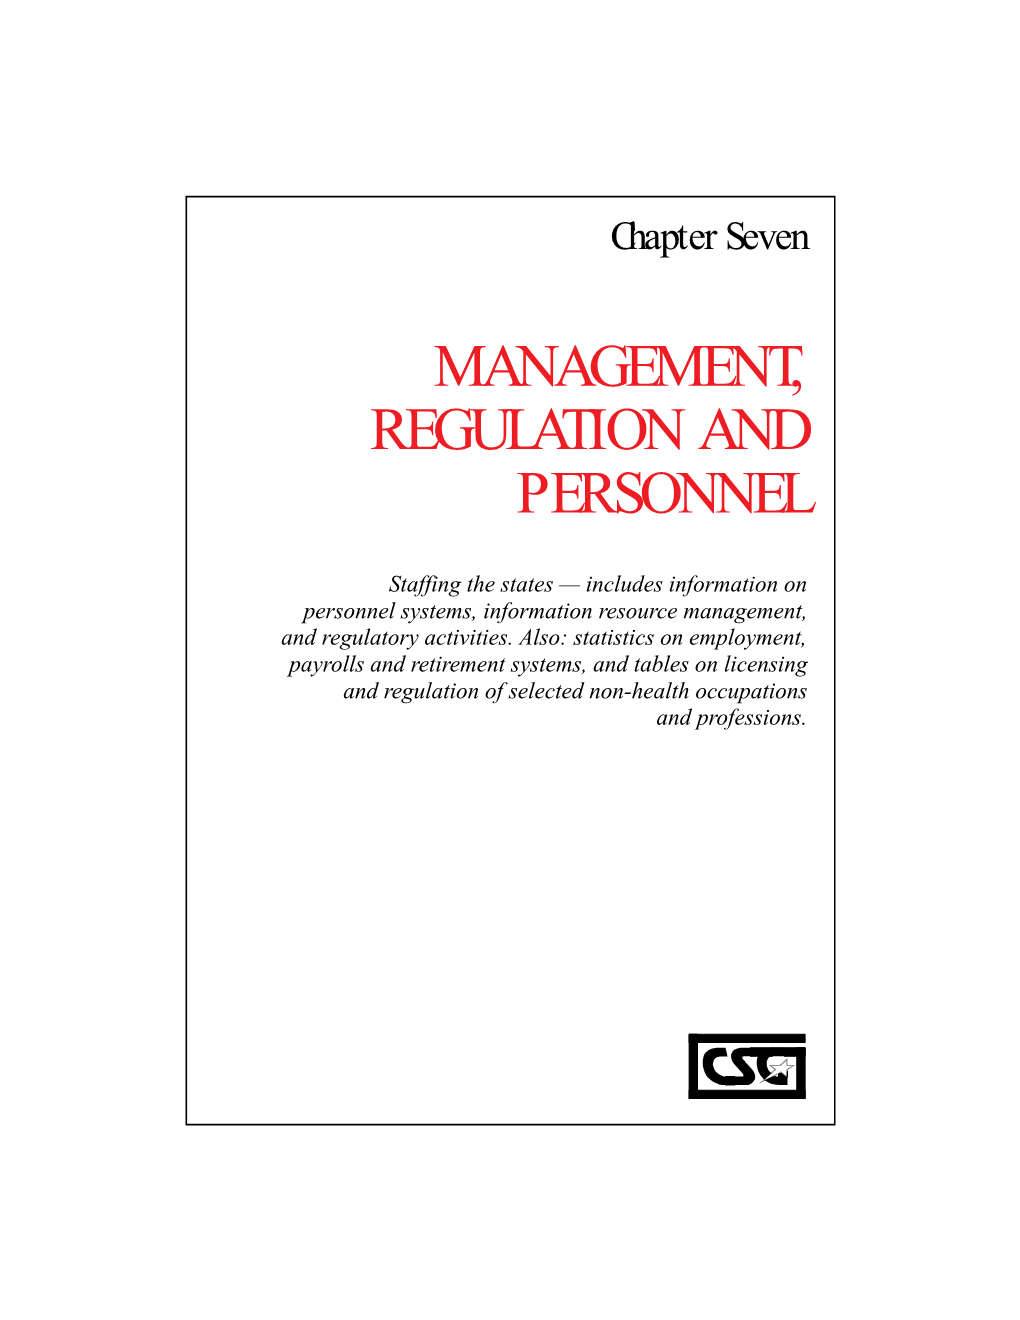 Chapter 7, Management, Regulation, and Personnel